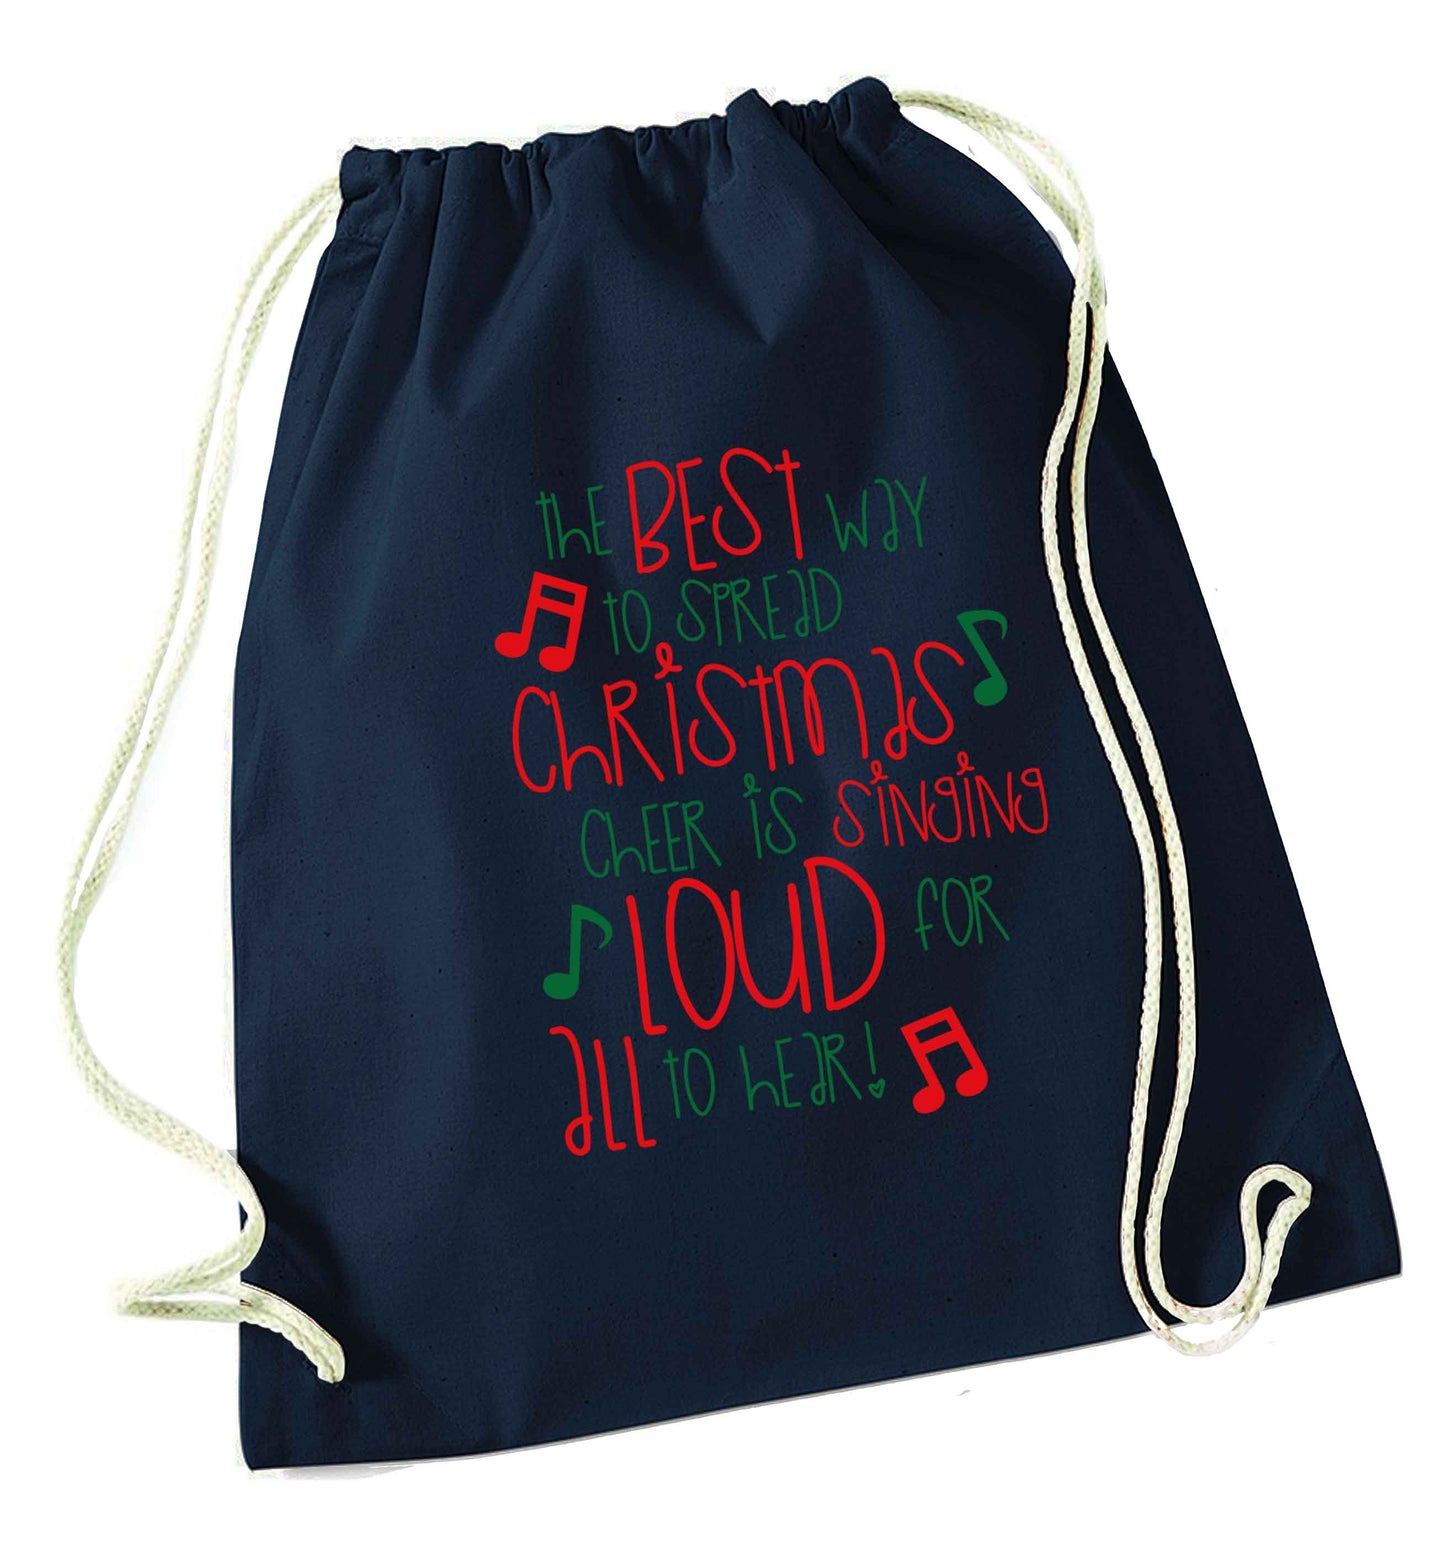 The best way to spread Christmas cheer is singing loud for all to hear navy drawstring bag